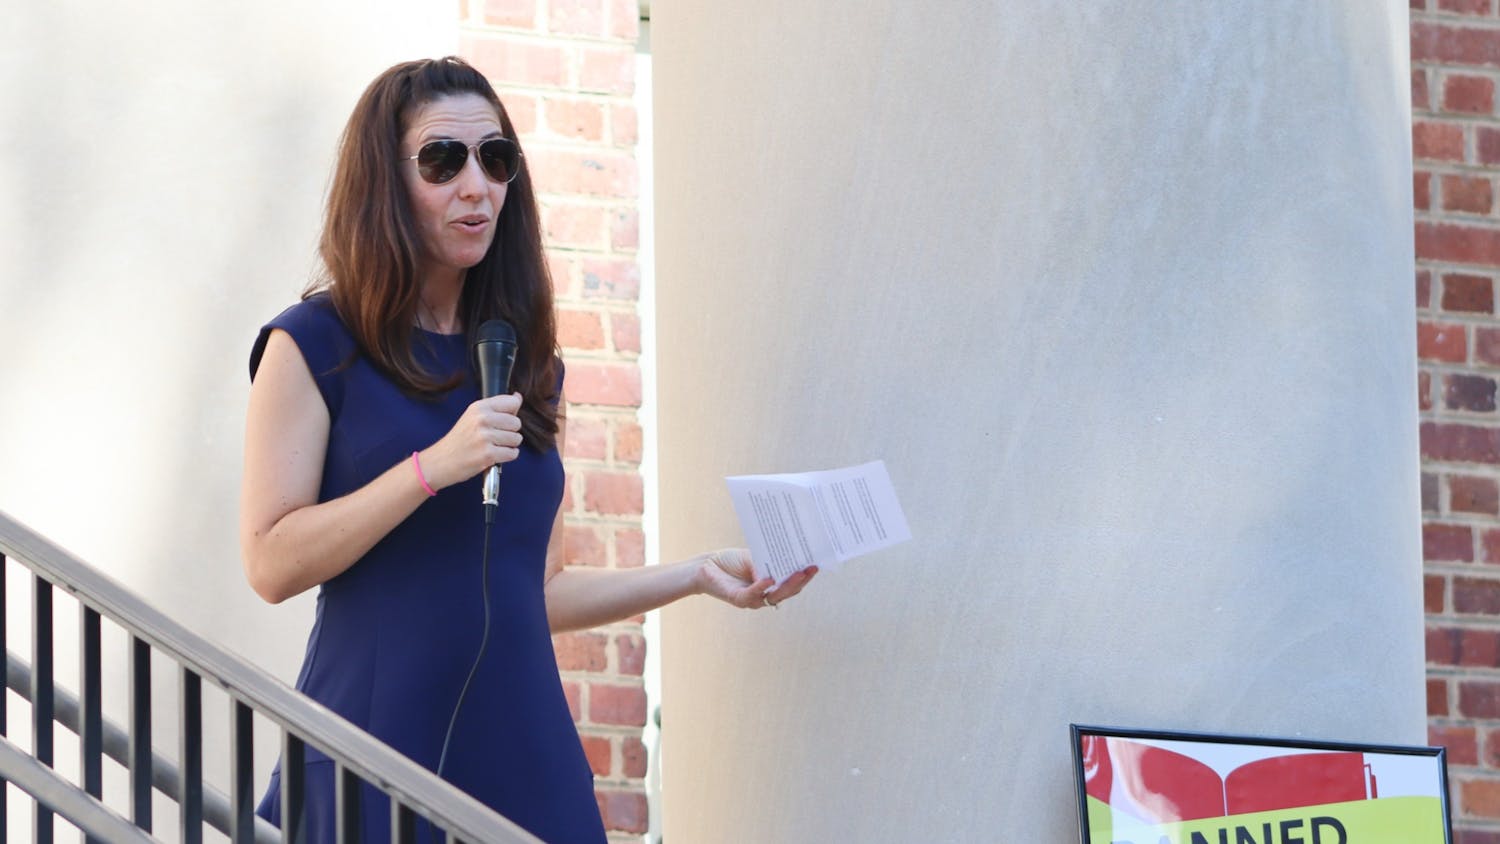 Dr. Francesca Tripodi introduces the Banned Books Reading Event from the steps of Manning Hall on Wednesday, Sept. 21, 2022, as part of First Amendment Day.